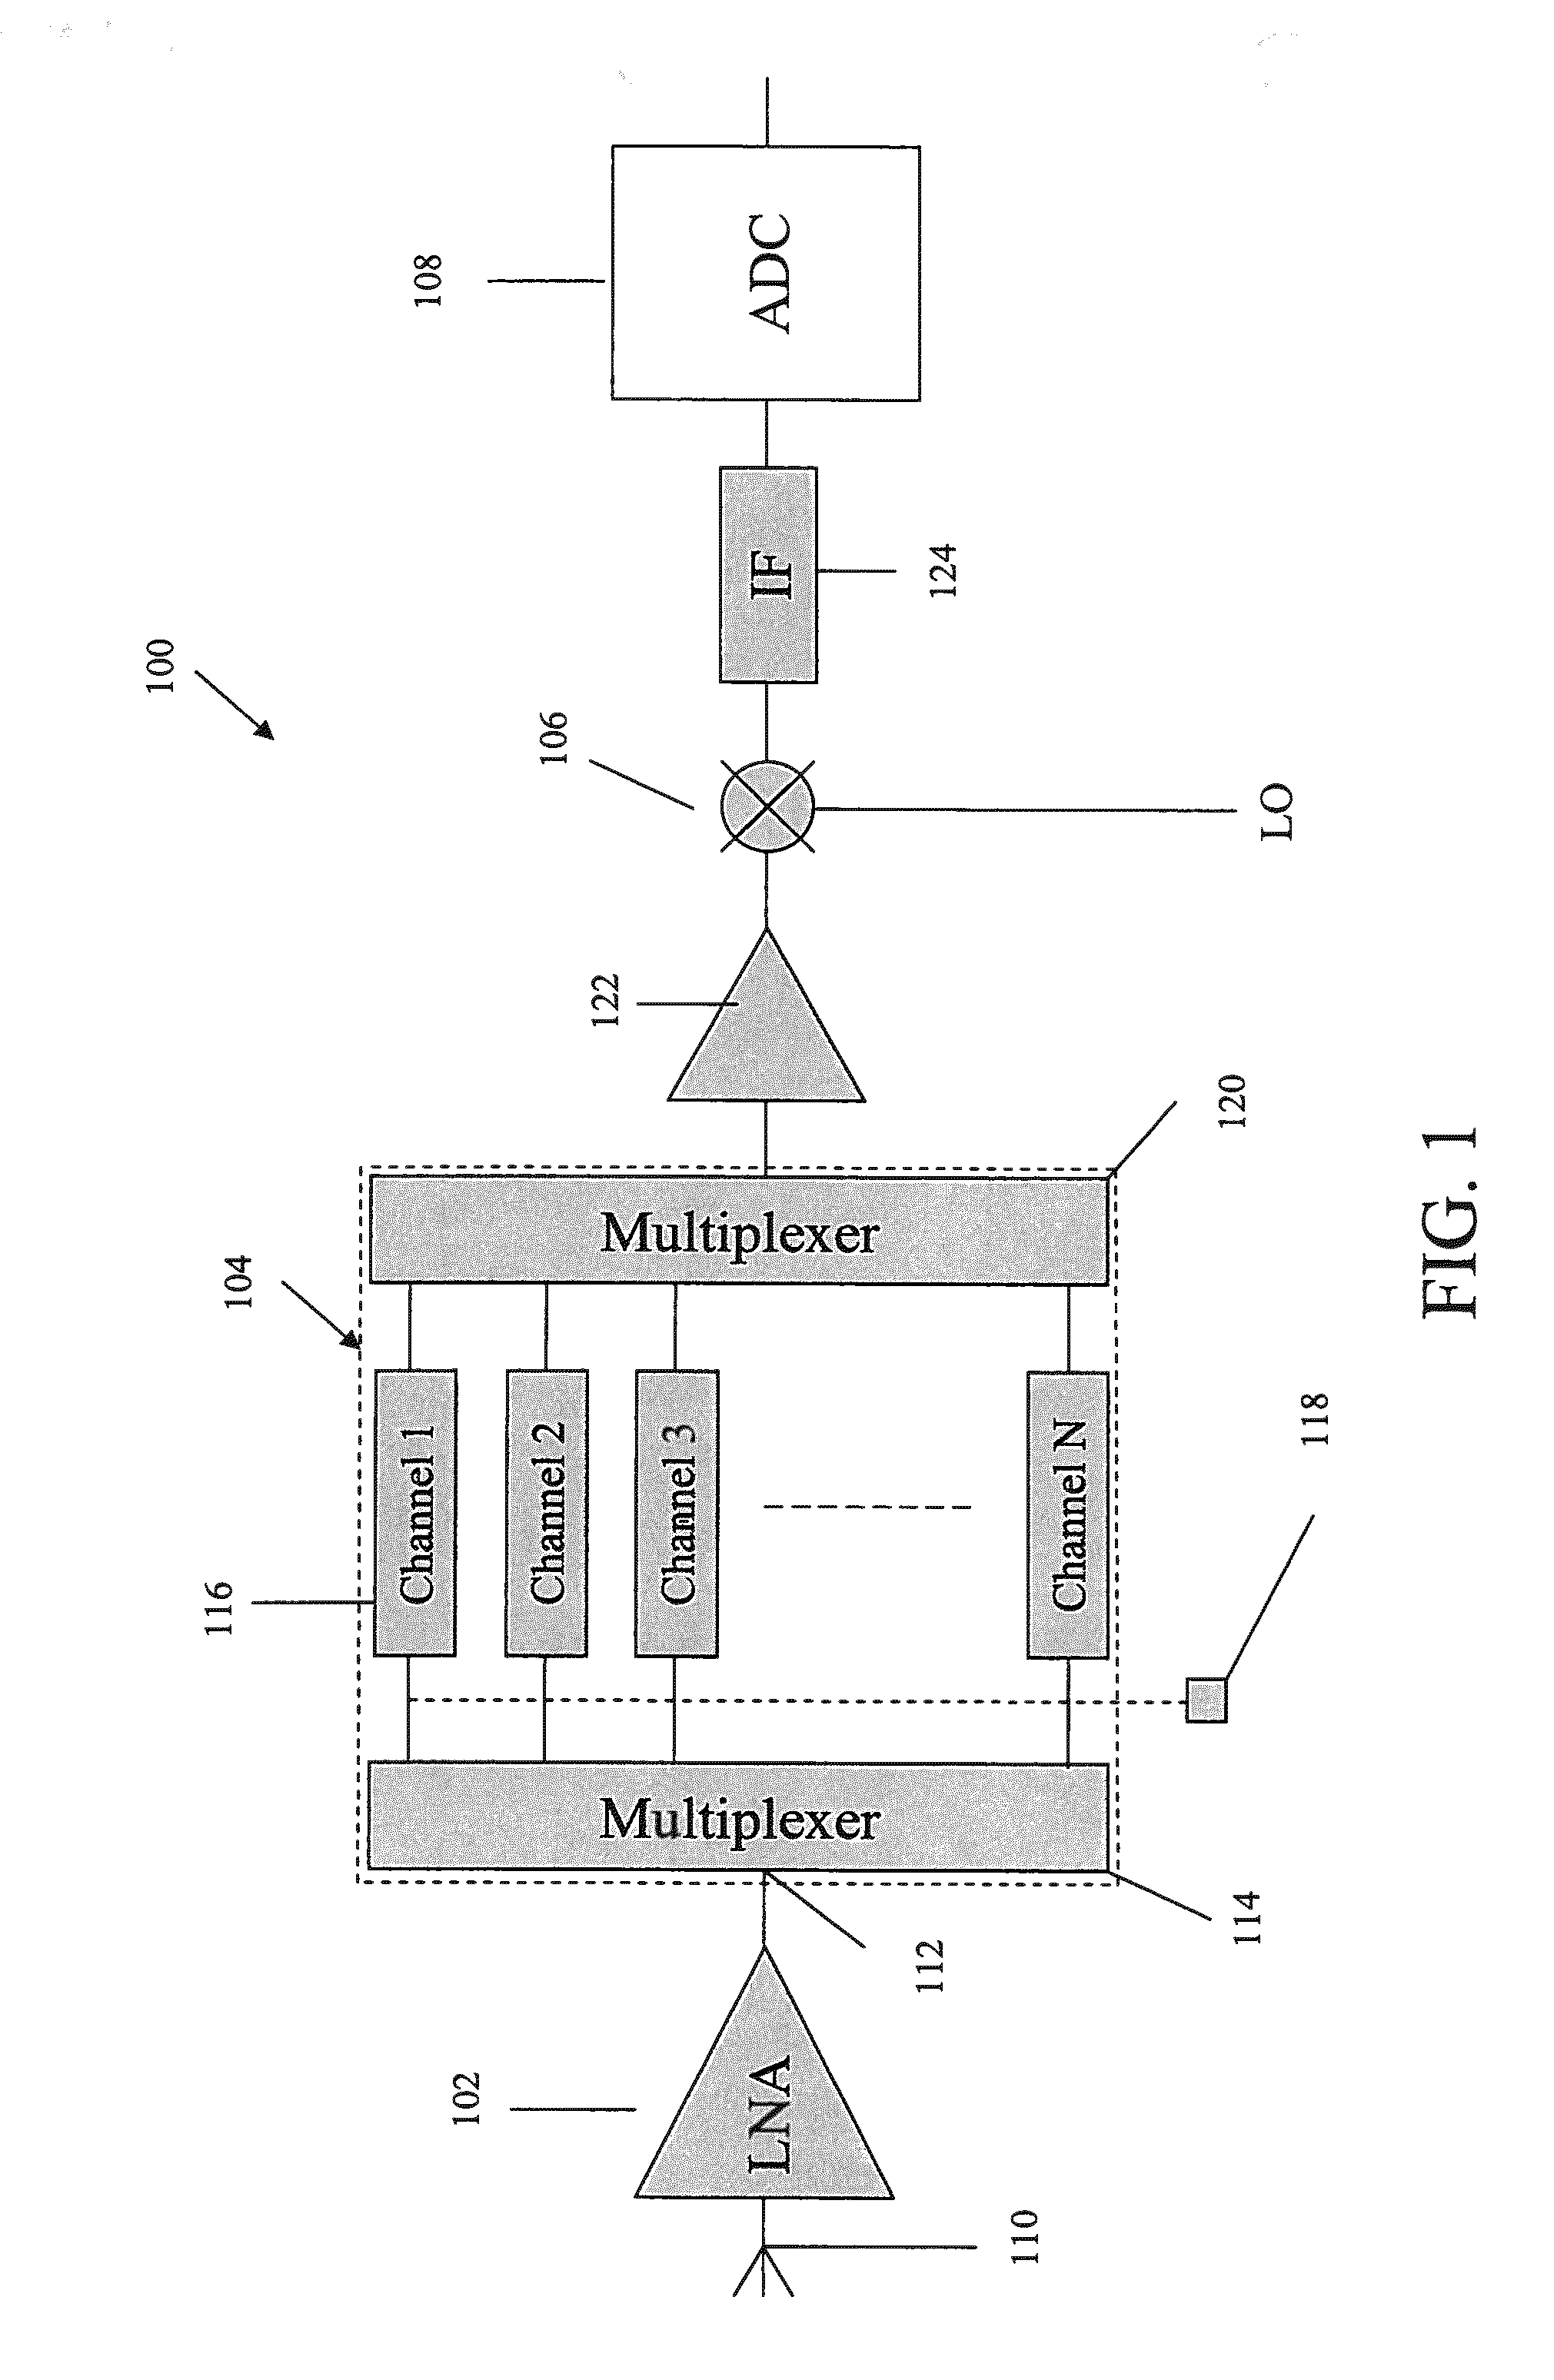 Multi-Function Receiver With Switched Channelizer Having High Dynamic Range Active Microwave Filters Using Carbon Nanotube Electronics